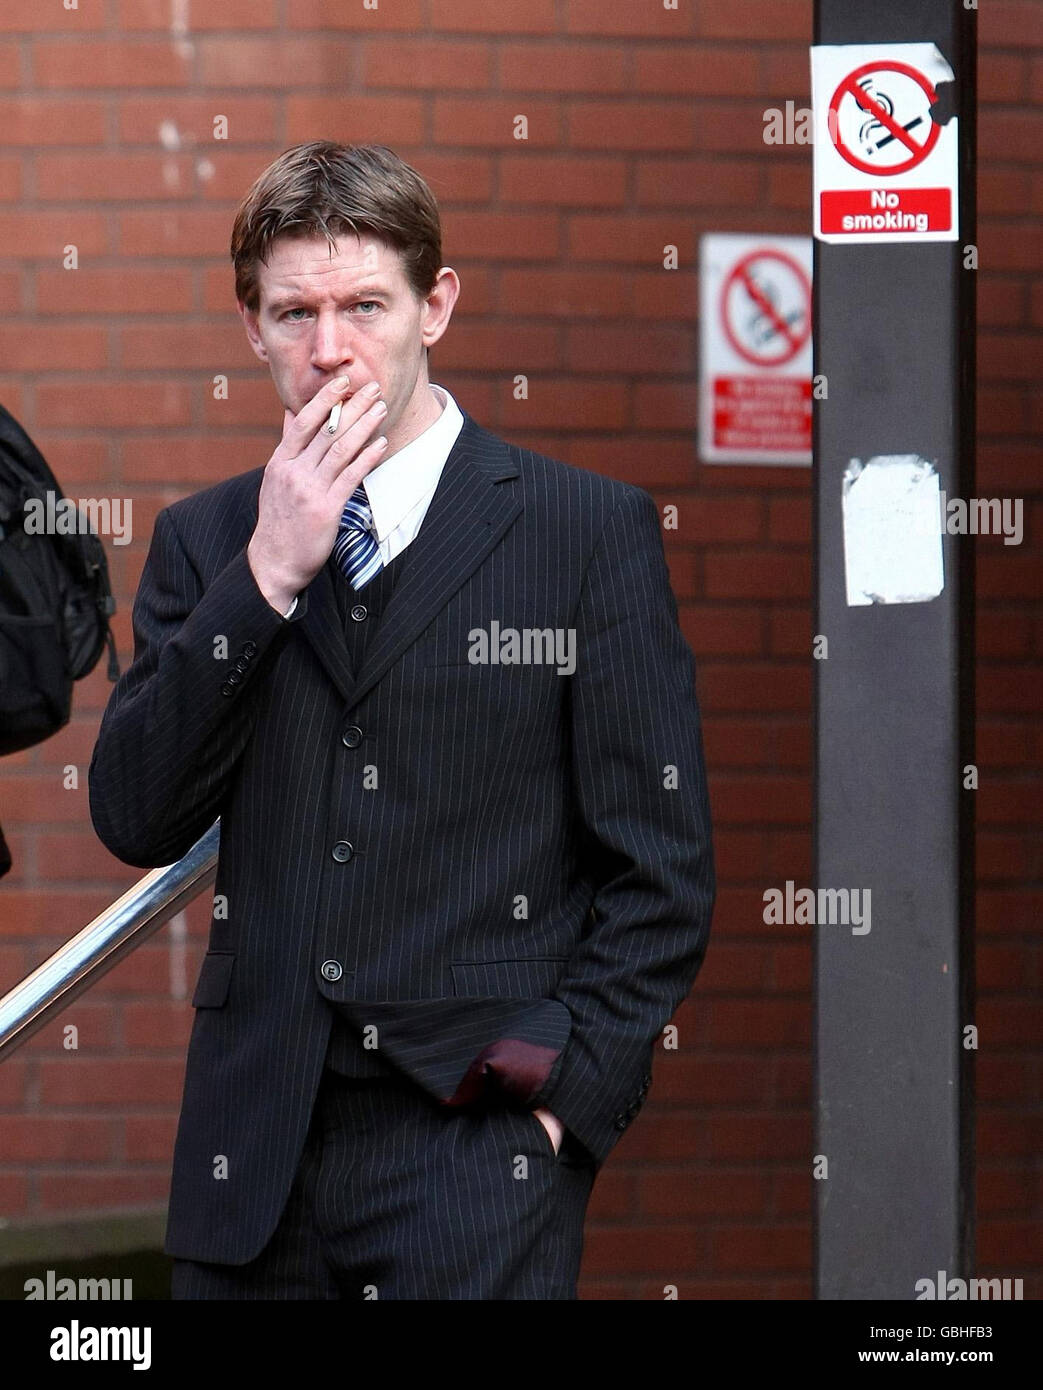 Ian Price leaves Birmingham Crown Court, Birmingham, after the court heard that he tried to murder his wife by rigging their home with a home-made fire-starting device while he spent the night with his mistress. Stock Photo